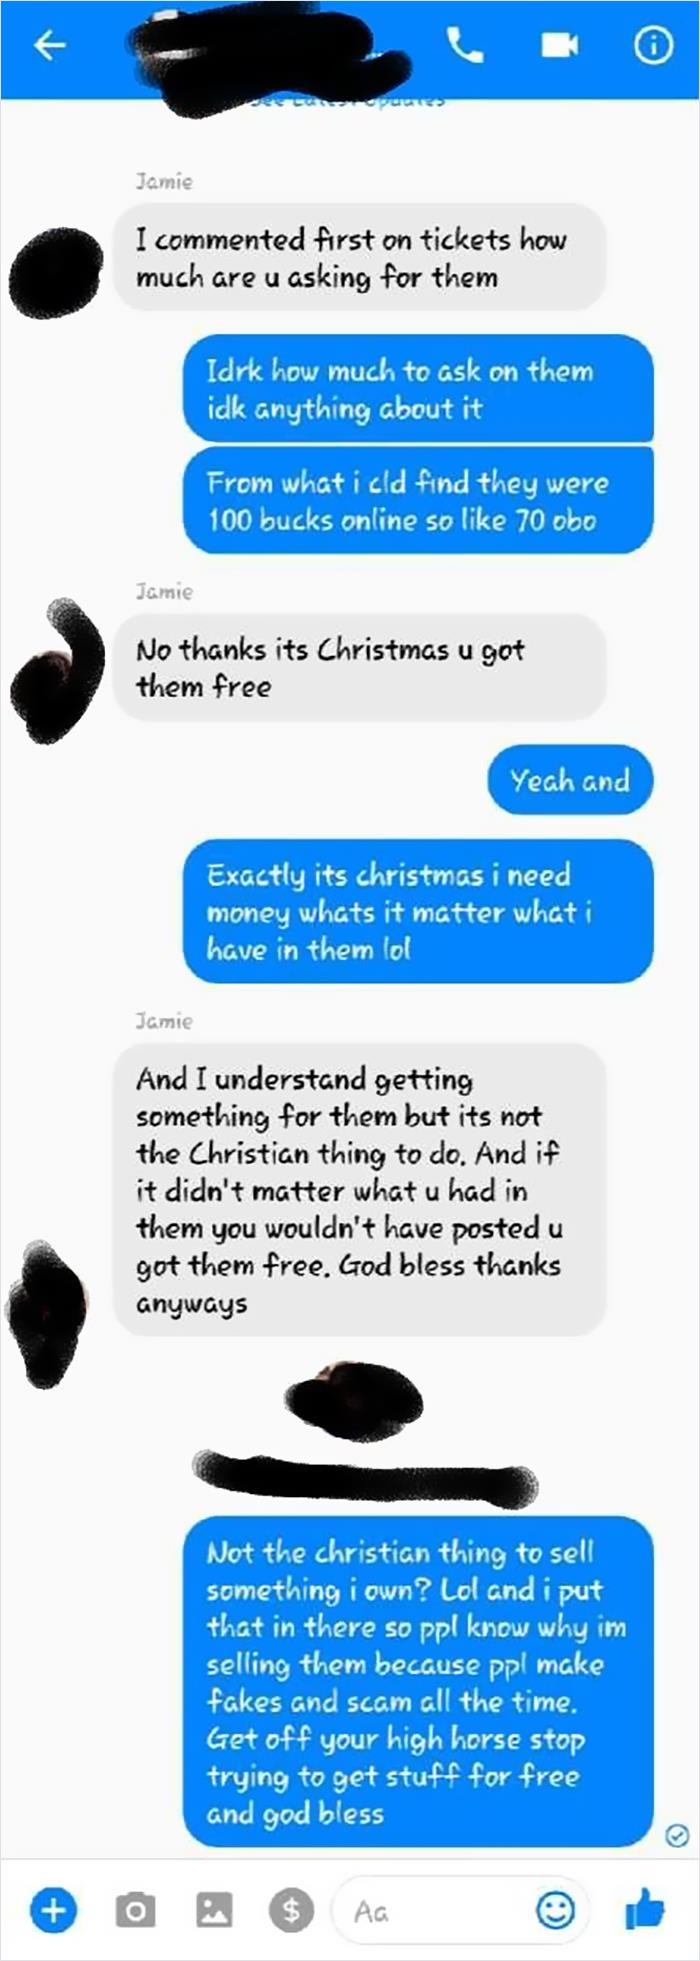 My Brother Won Some Basketball Tickets At Our Work Christmas Party Last Night. Not Being A Basketball Fan, He Decided To Try To Sell Them To Make Money To Go Towards Our Parents Christmas Present. As You Know, It's Choosy Beggars Favorite Time Of The Year!